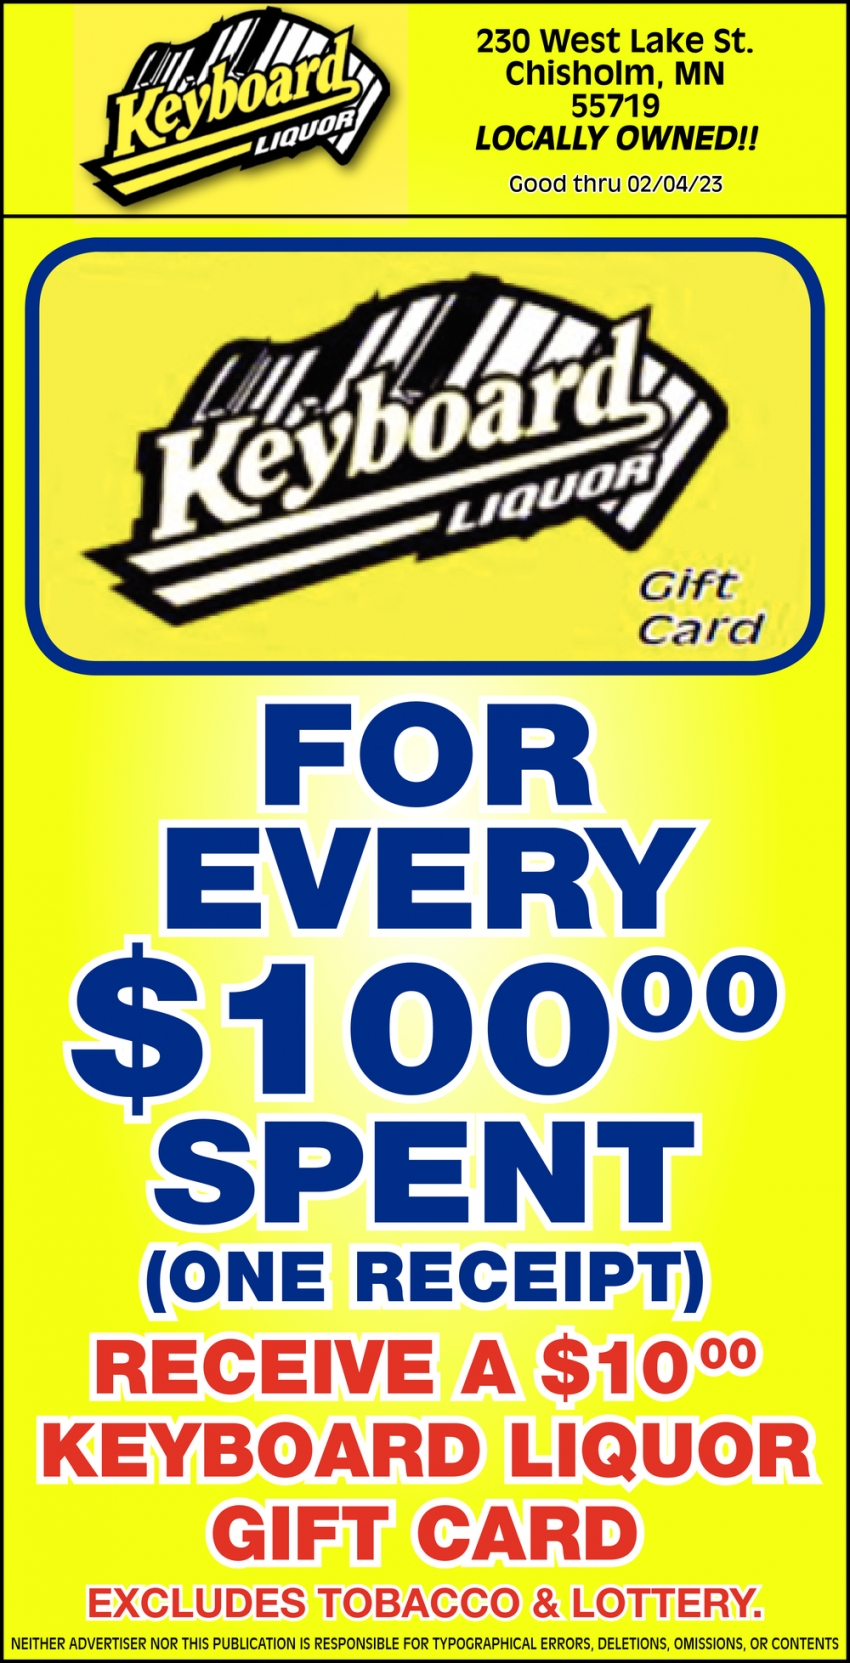 For $100.00 Spent (One Receipt) Receive Aa $10.00 Keyboard Liquor Gift Card